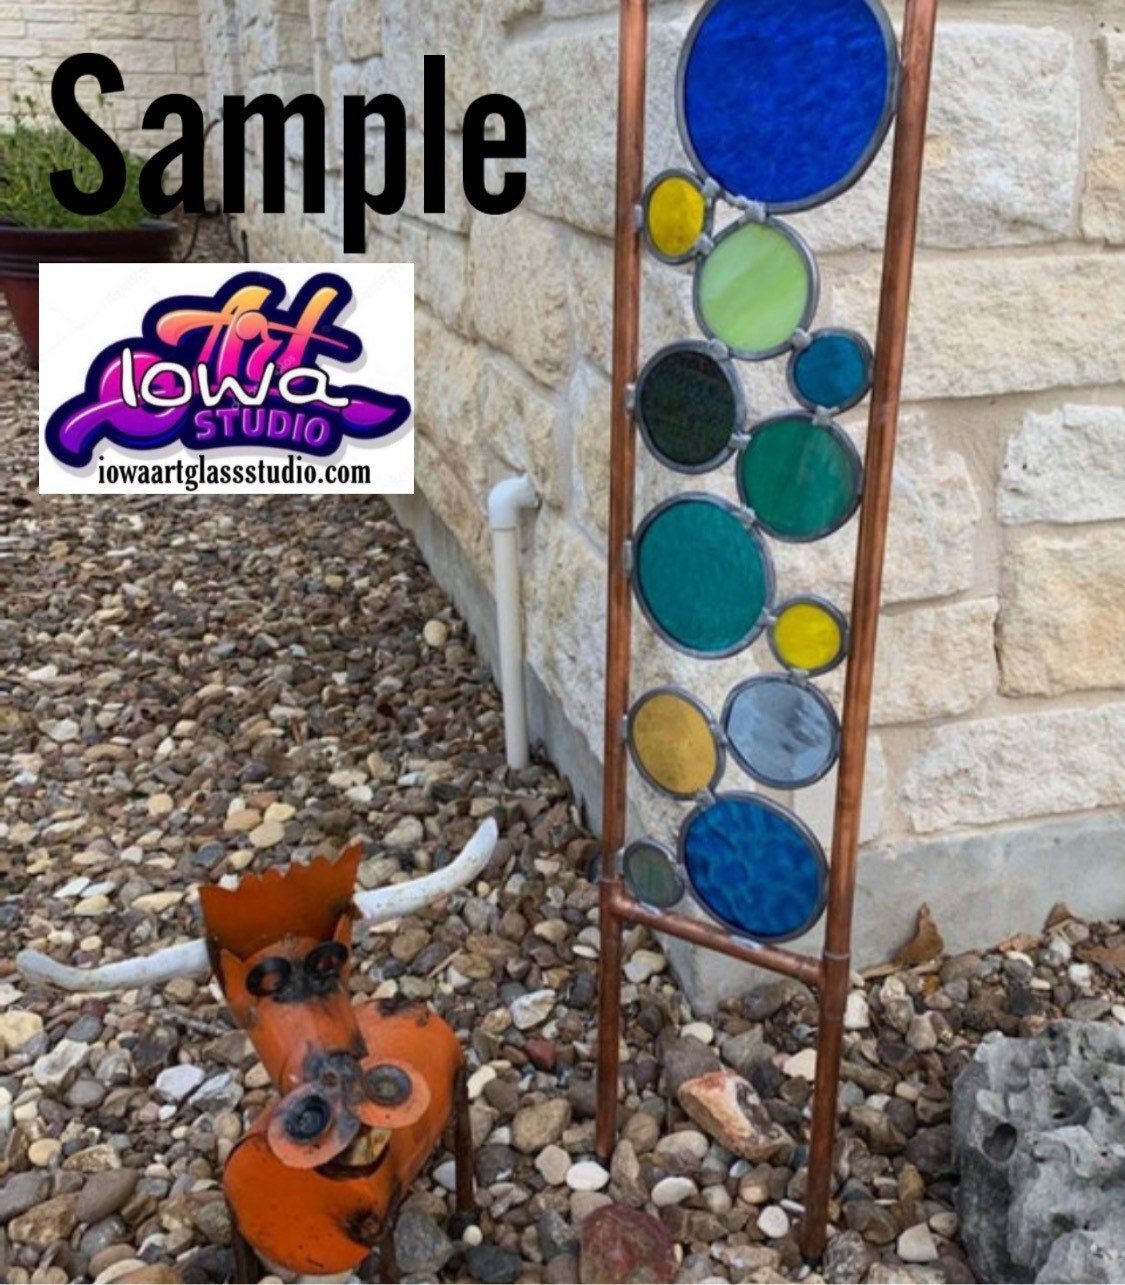 One Small Custom Copper and glass garden Stained Glass garden art stake. Free Shippingthumbnail